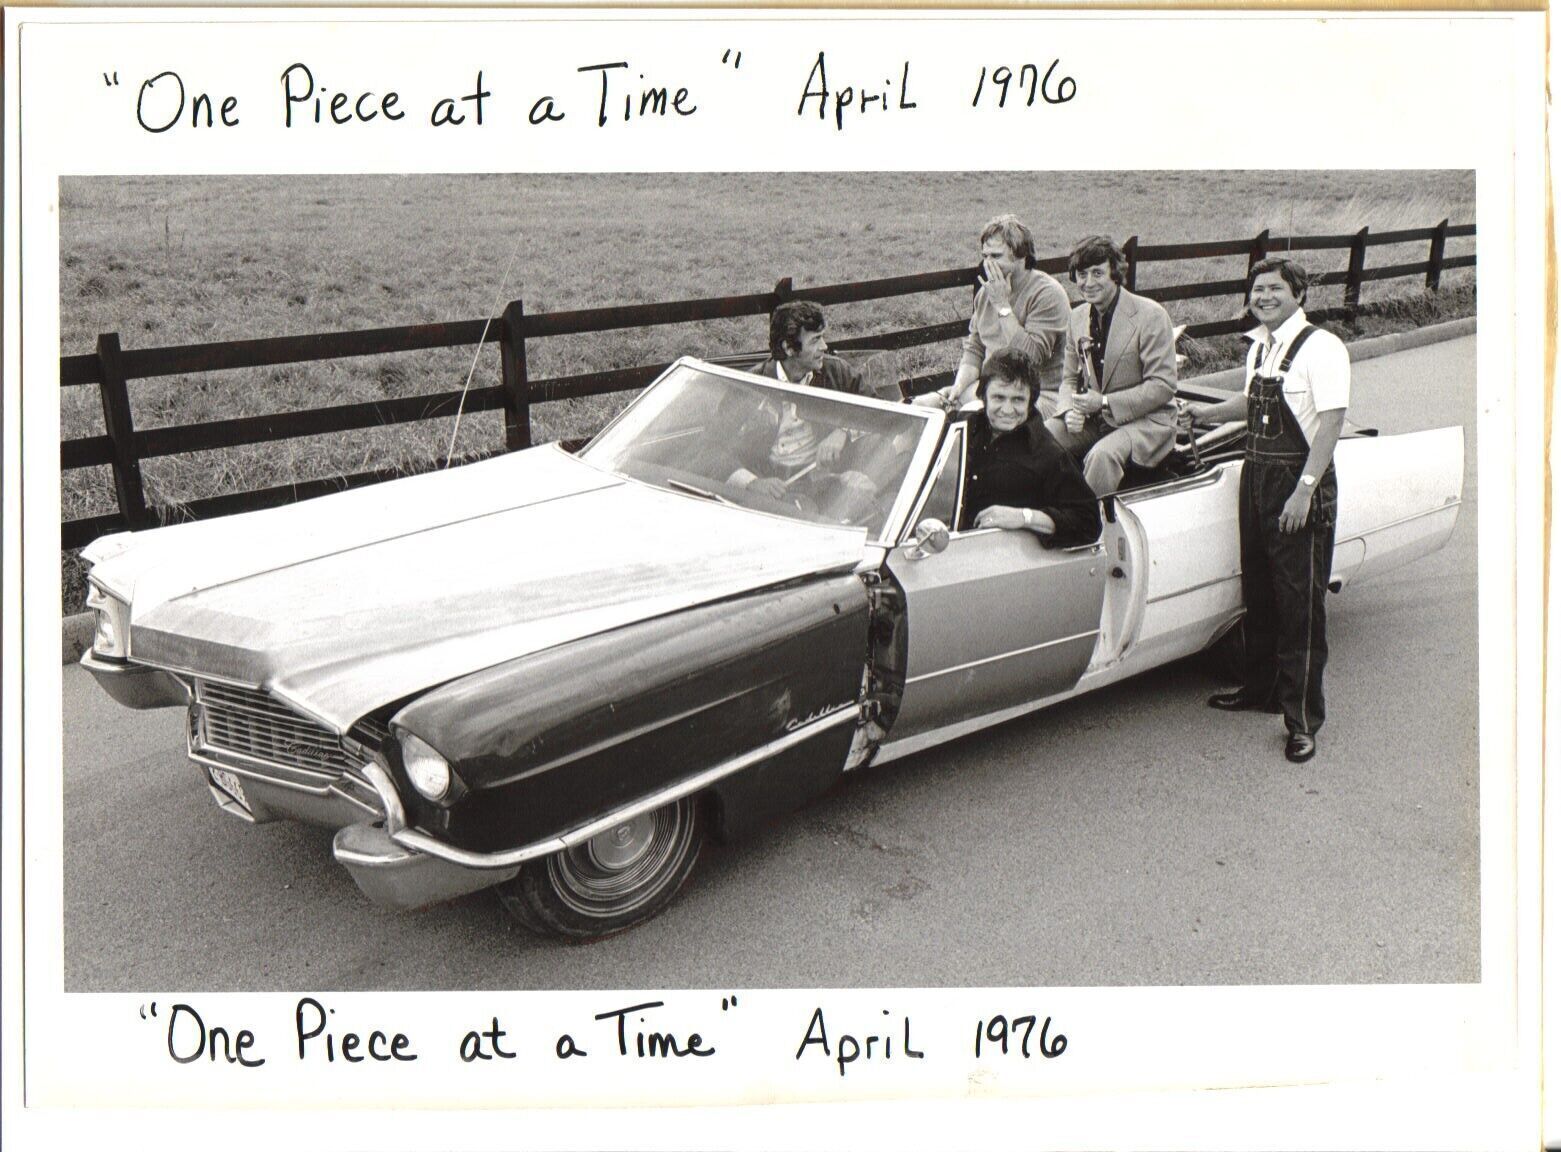 Johnny Cash poses at wheel of his One Piece At A Time Cadillac 8x10 inch photo